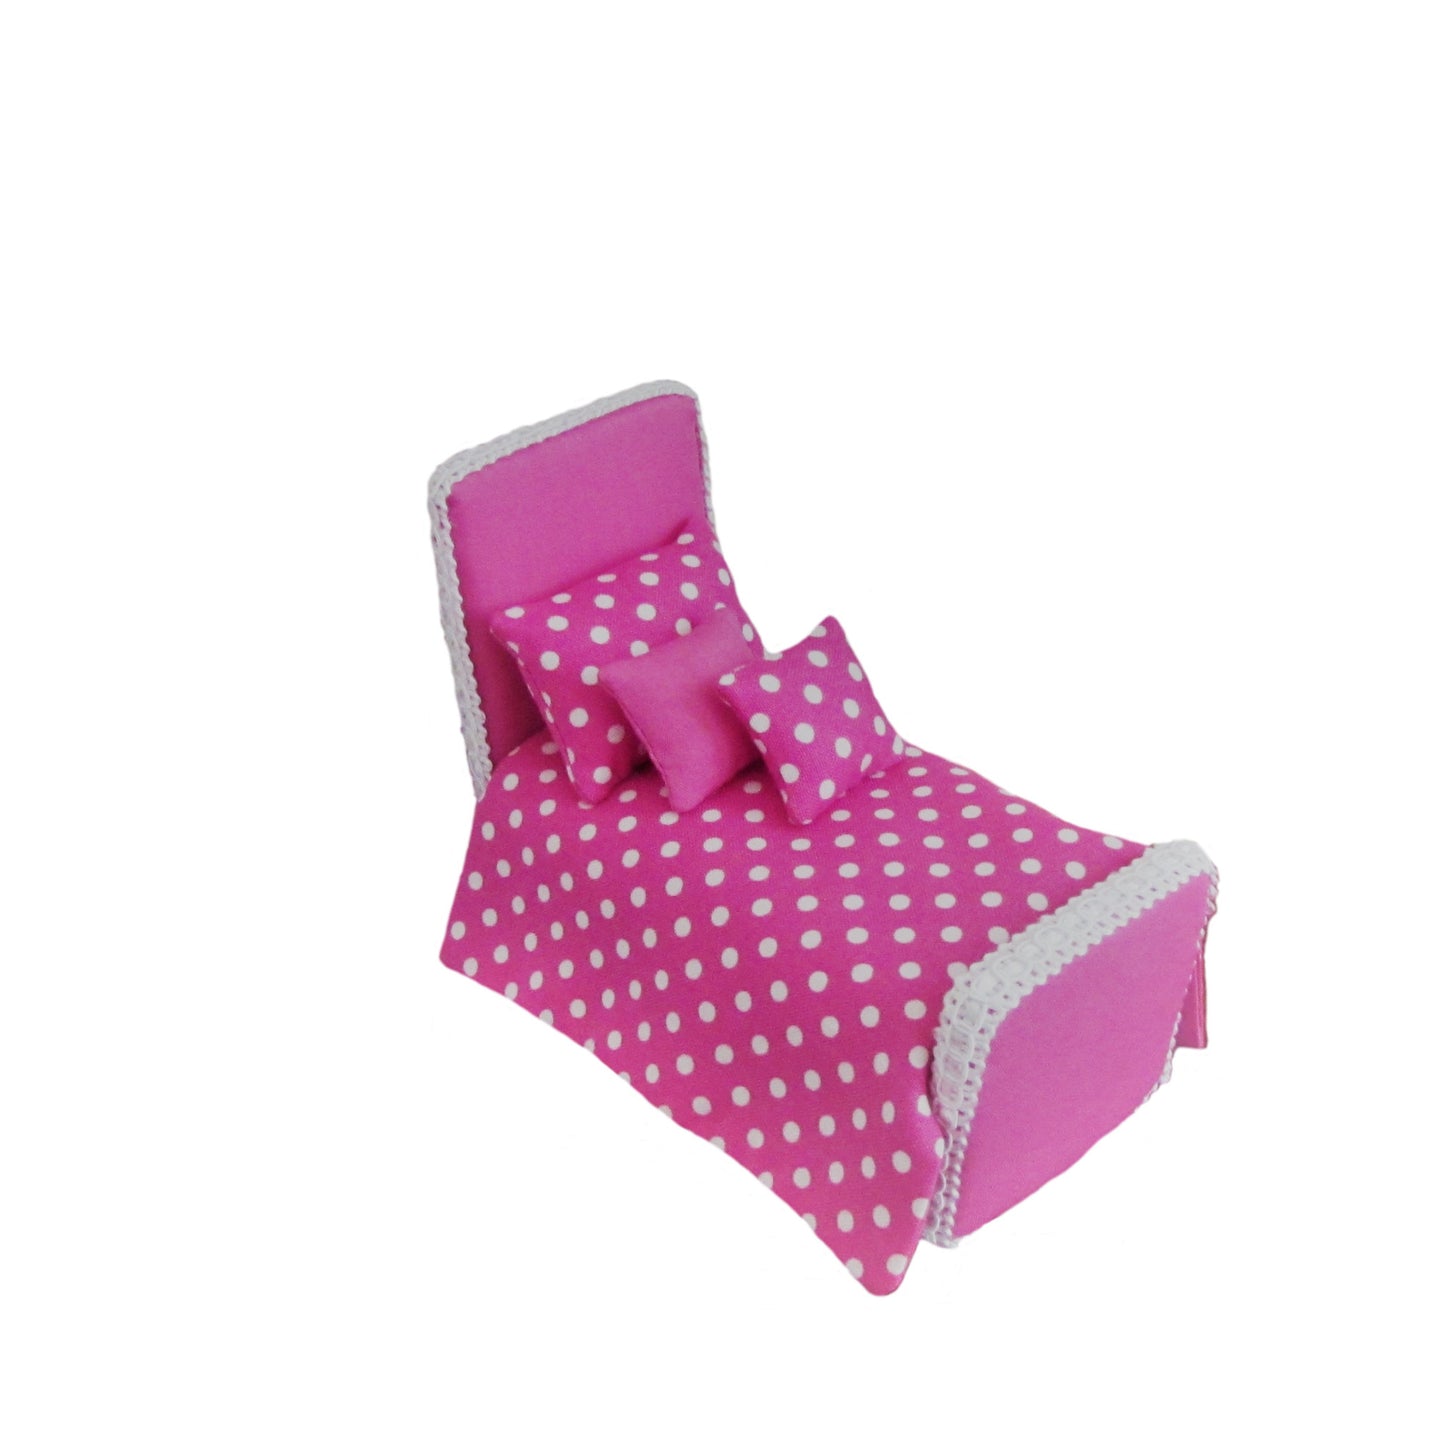 Bright Pink Upholstered Doll Bed and White Dots Doll Bedding for 3-inch dolls